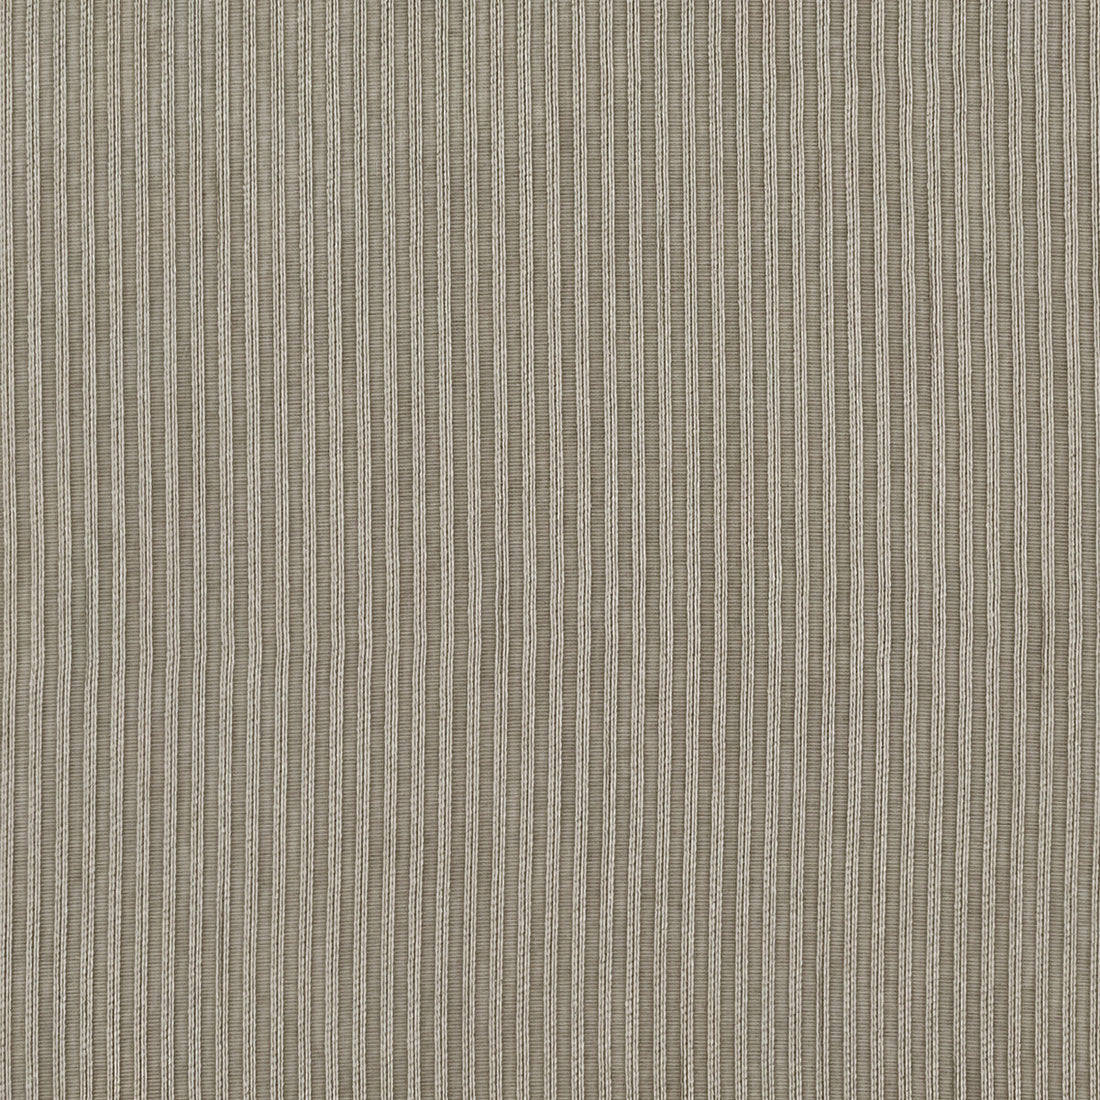 Matteo fabric in charcoal color - pattern F1283/04.CAC.0 - by Clarke And Clarke in the Clarke &amp; Clarke Lusso Sheers collection